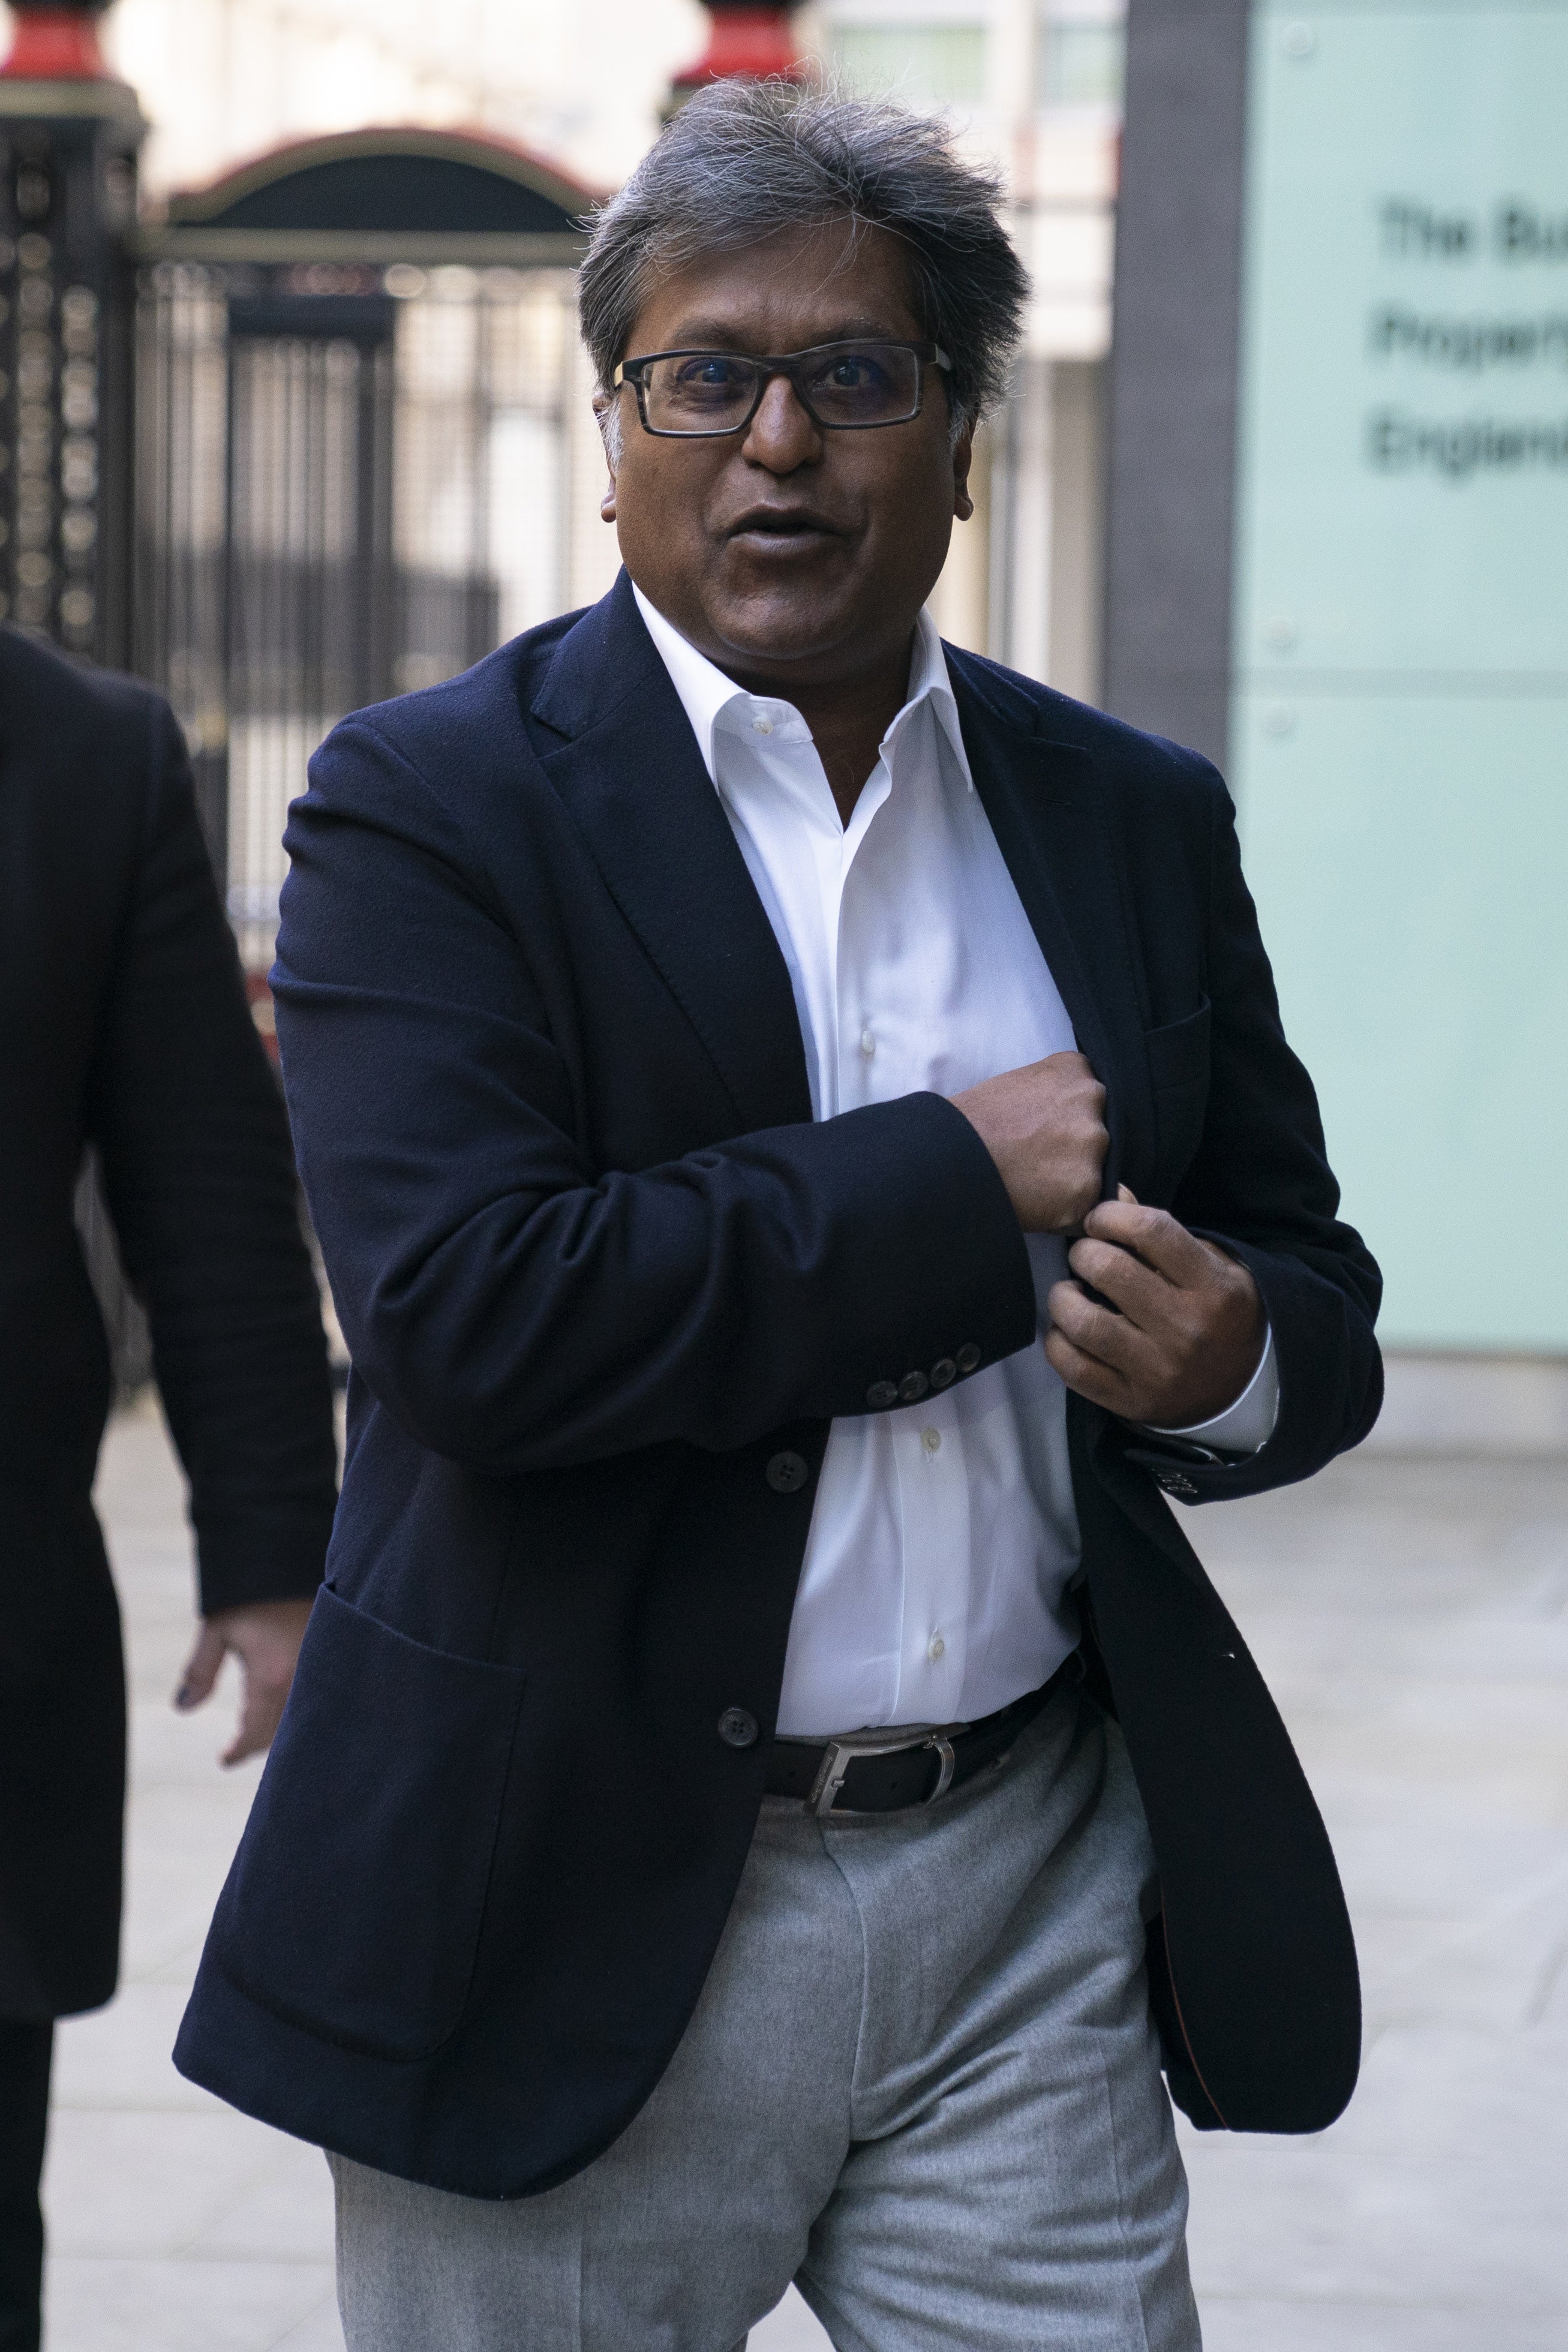 Lalit Modi won his case over claims that he deceived a venture capitalist over an investment (Kirsty O’Connor/PA)